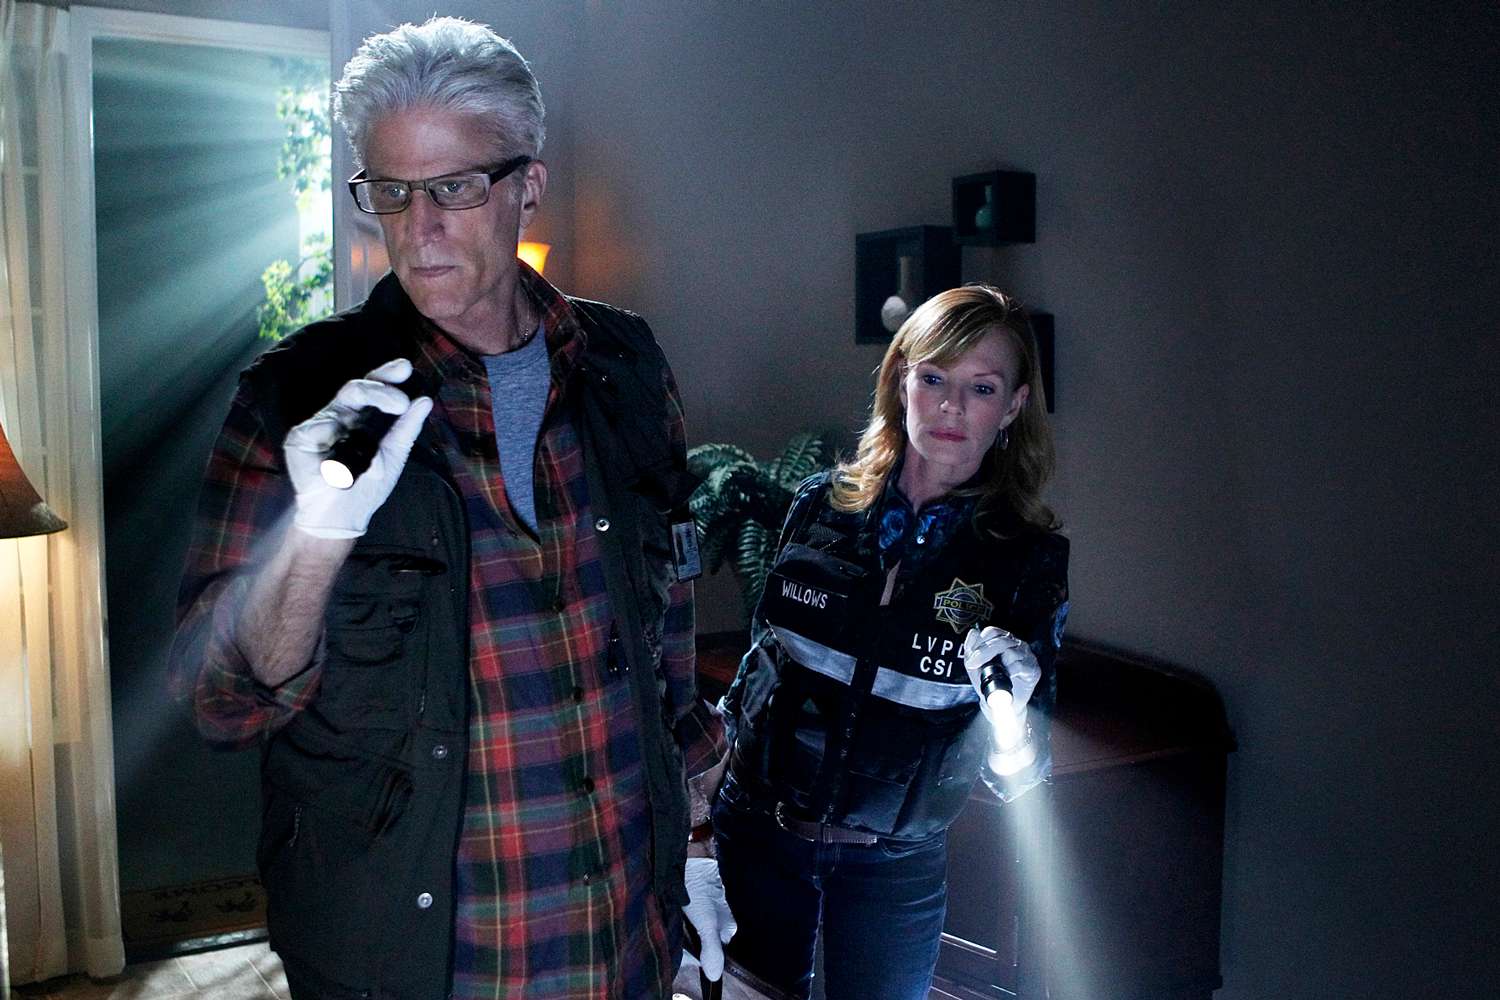 Time is of the essence for D.B. Russell (Ted Danson) (left) and Catherine Willows (Marg Helgenberger) as they search for clues, on CSI: CRIME SCENE INVESTIGATION, Wednesday, Sept. 28 (10:00-11:00 PM, ET/PT) on the CBS Television Network.